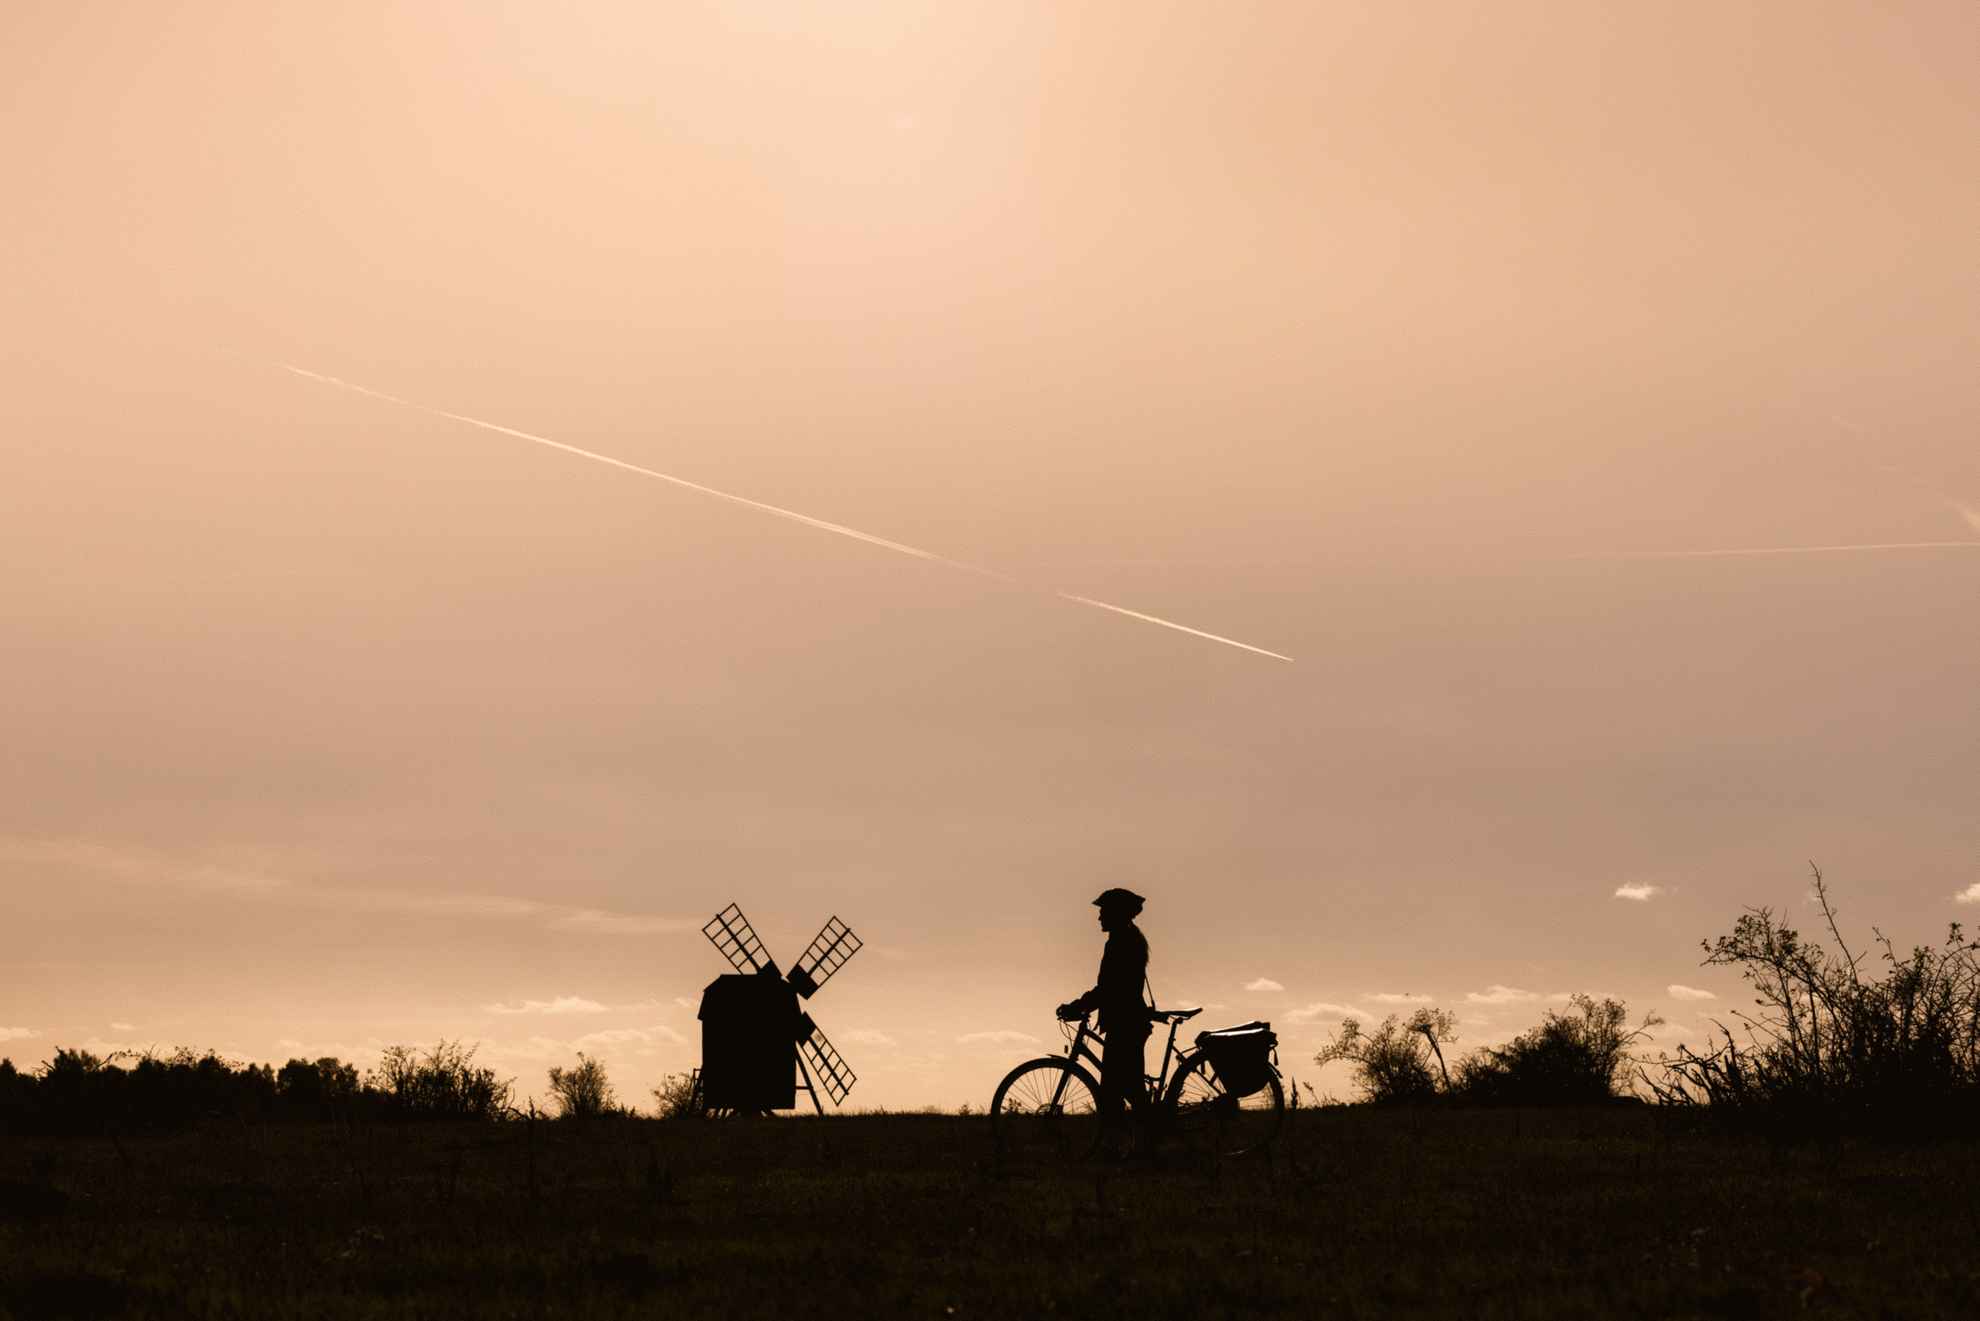 Silhouette of a cyclist at dusk with a windmill in the background